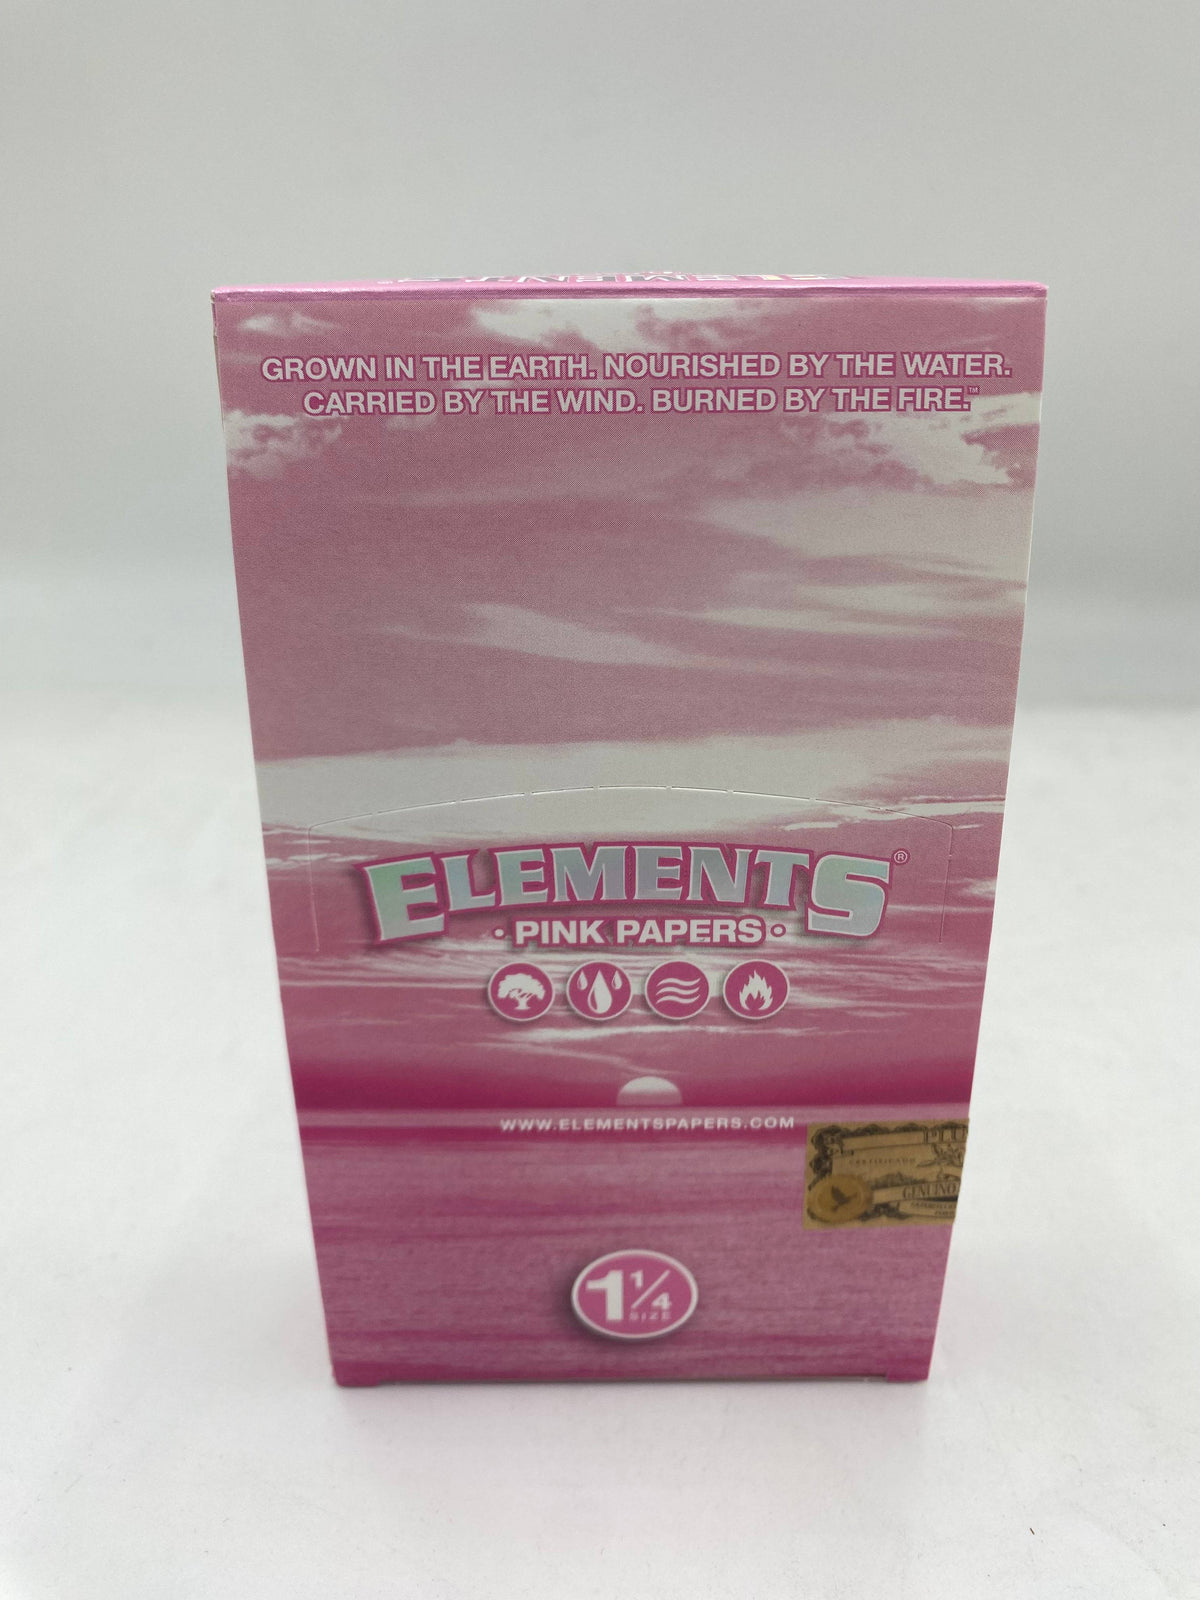 ELEMENTS 1 1/4 PINK ROLLING PAPERS 25 CT BOX 50 LPB